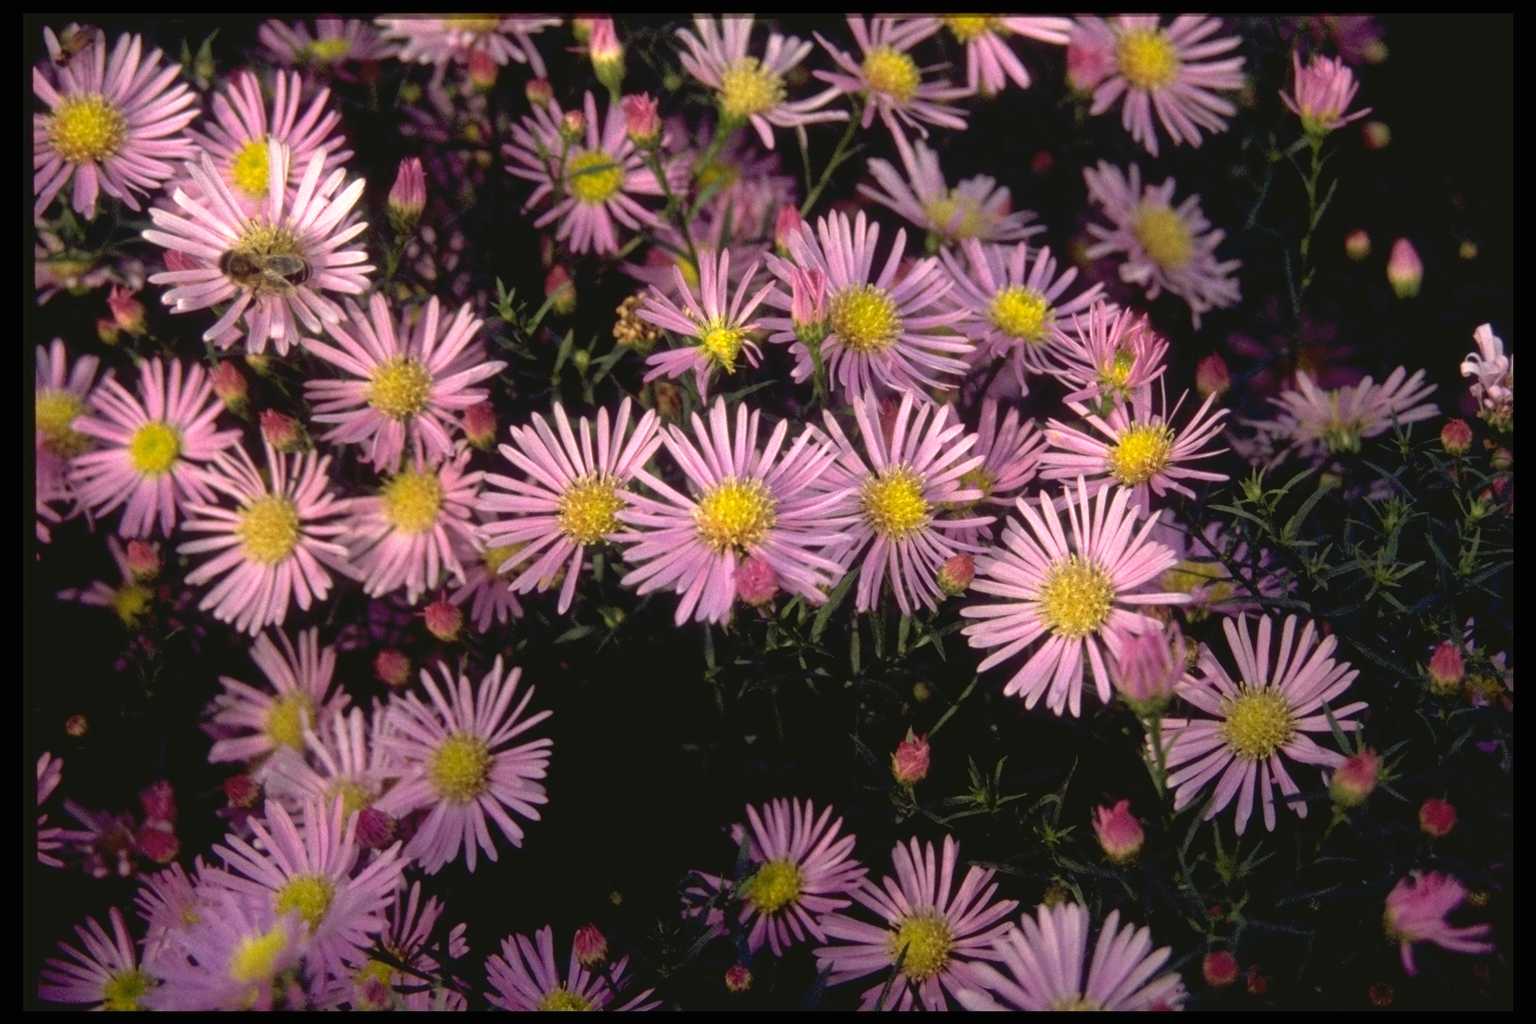 Aster ‘Pink Star’